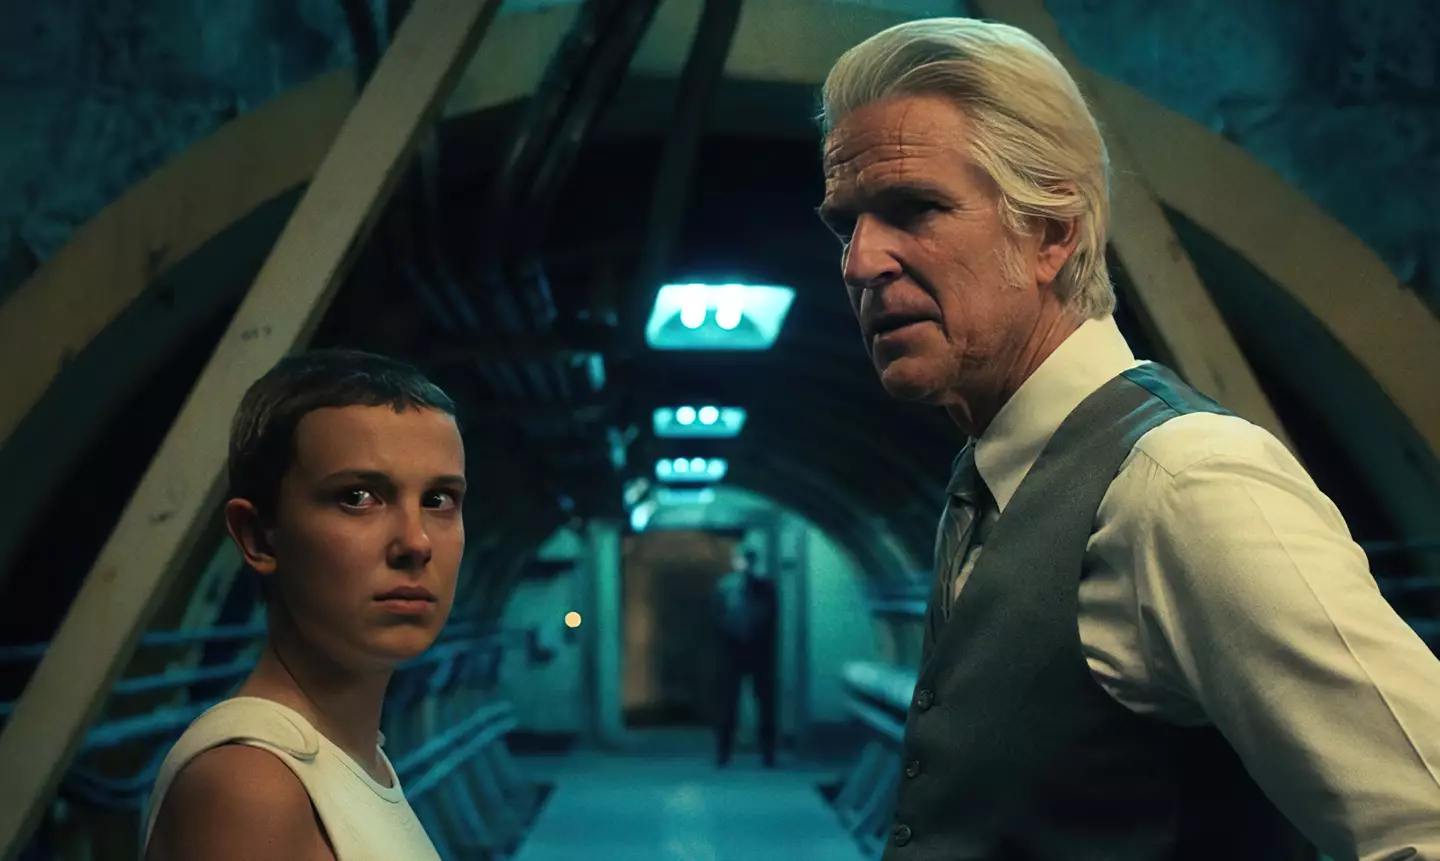 Matthew Modine has revealed how he and Millie Bobby Brown would prepare for some Stranger Things scenes.